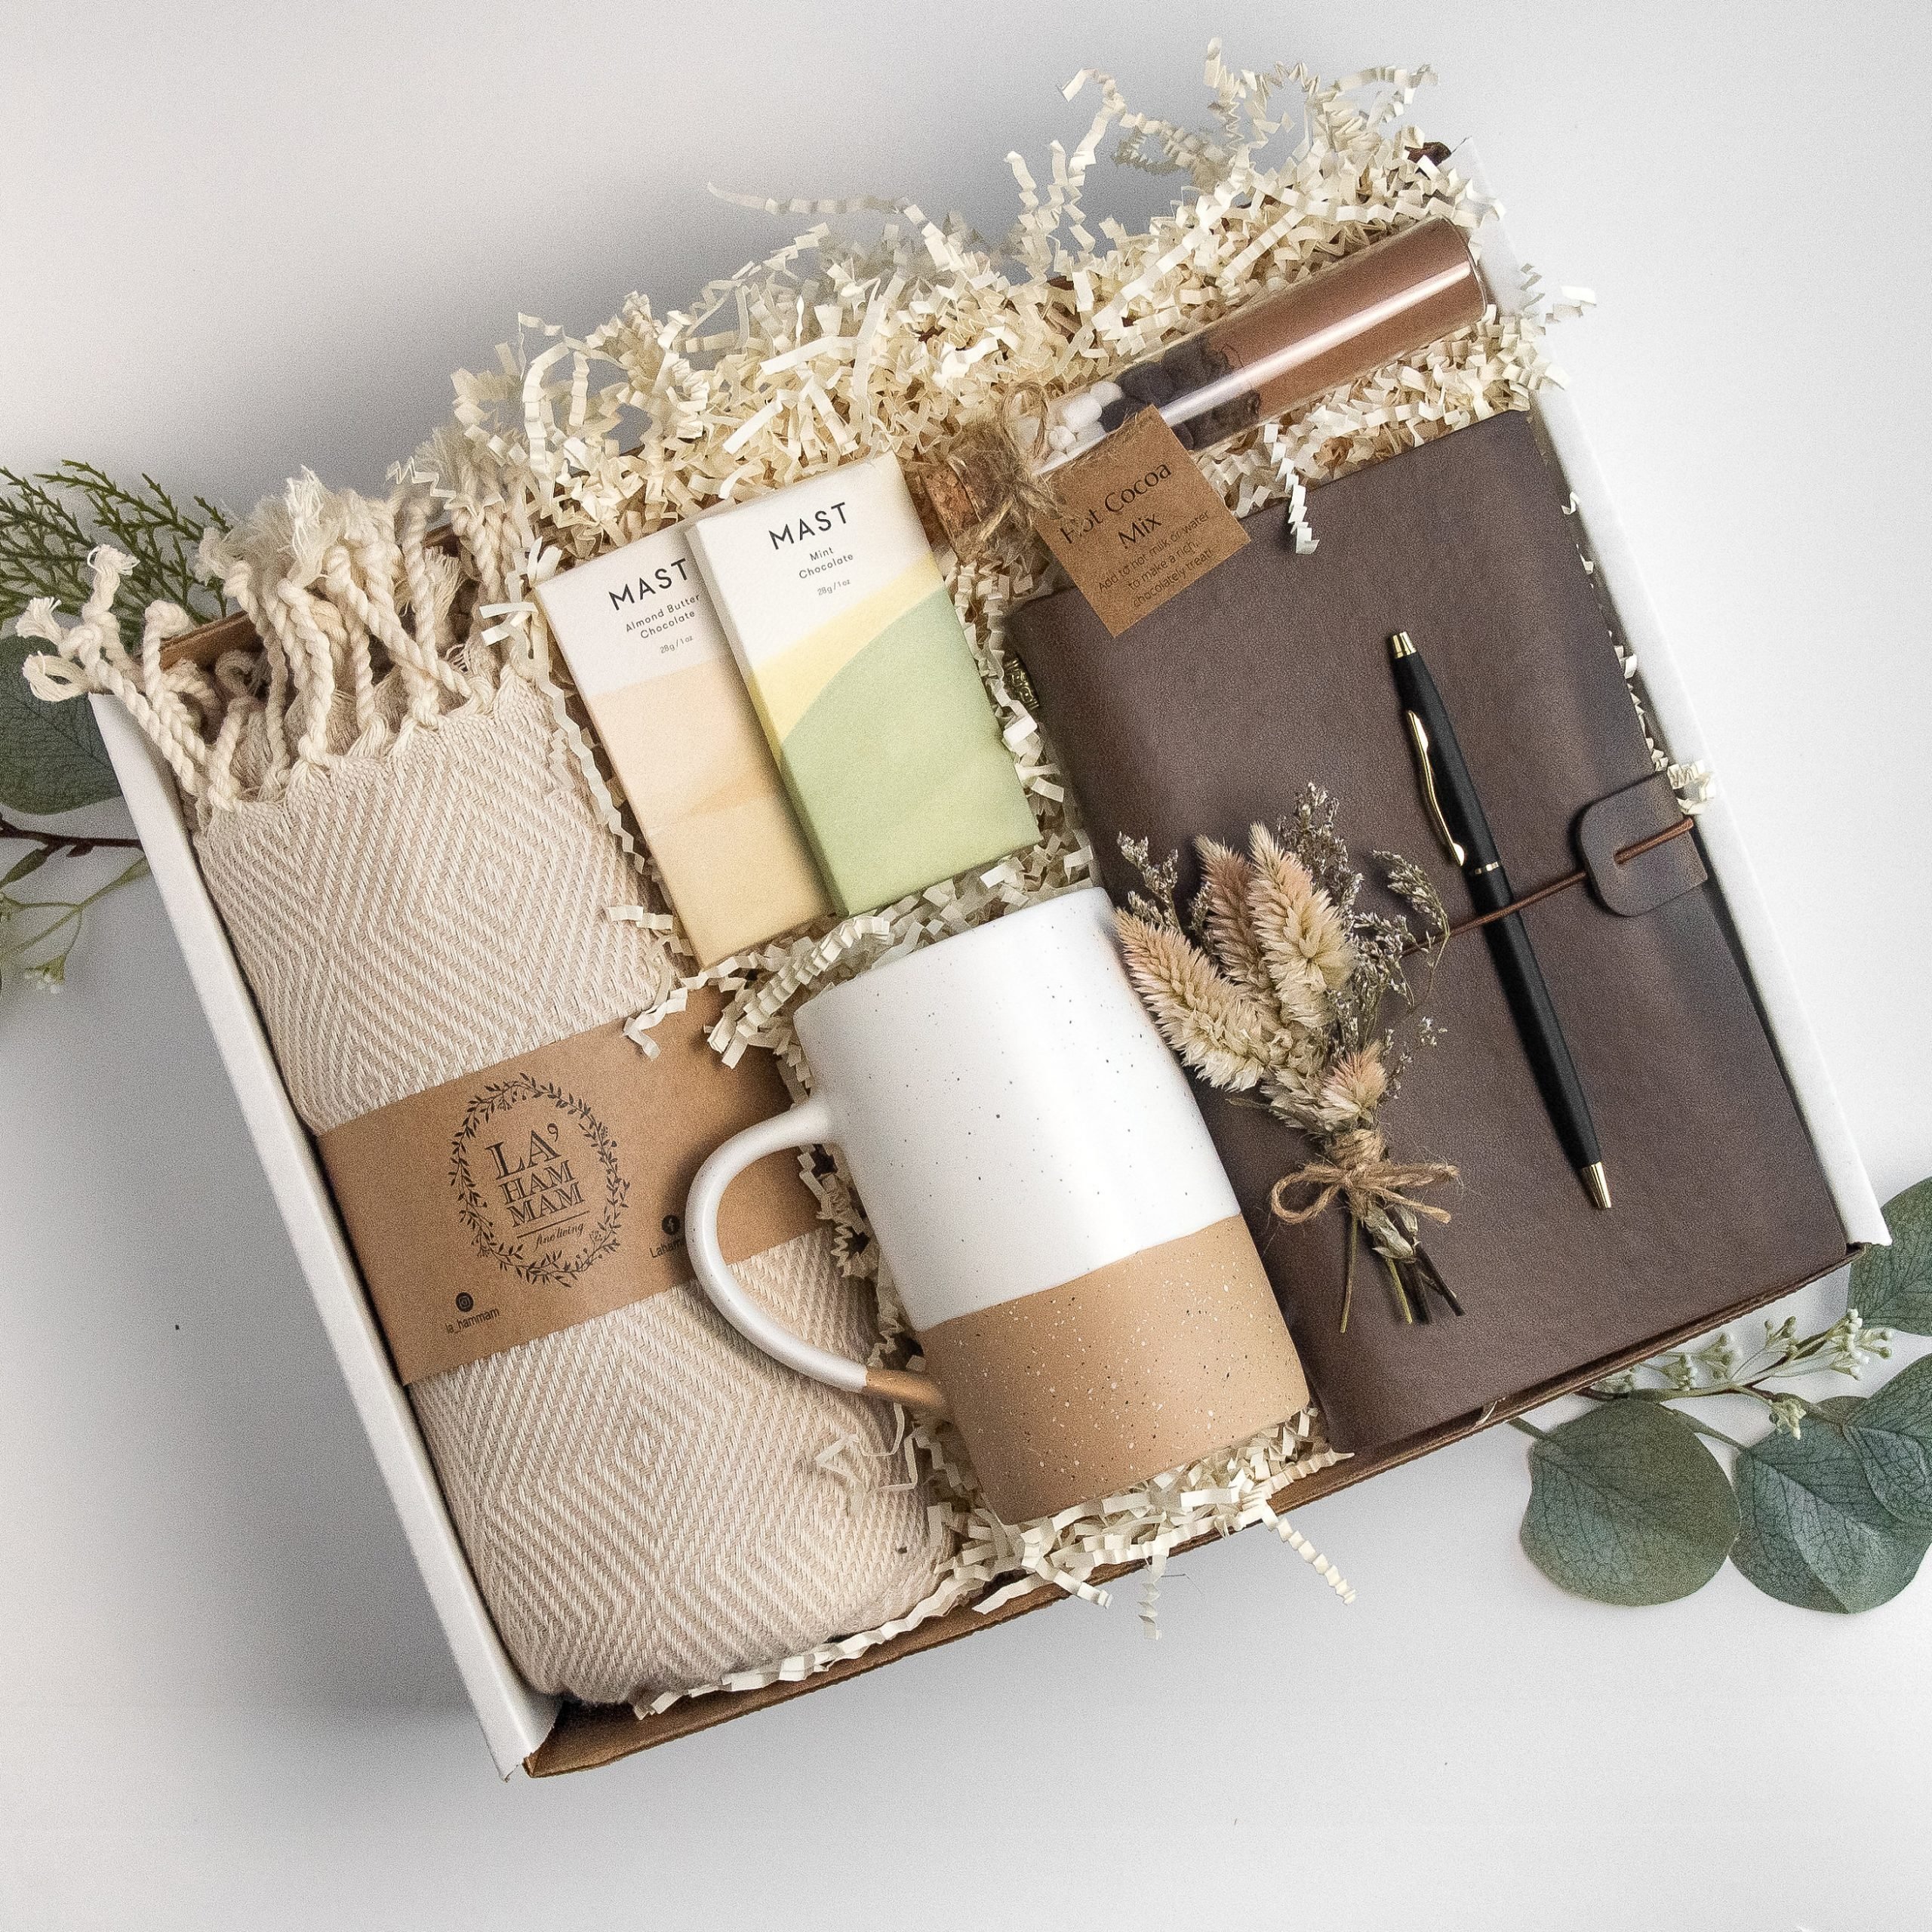 Christmas care package ideas to make a present personal